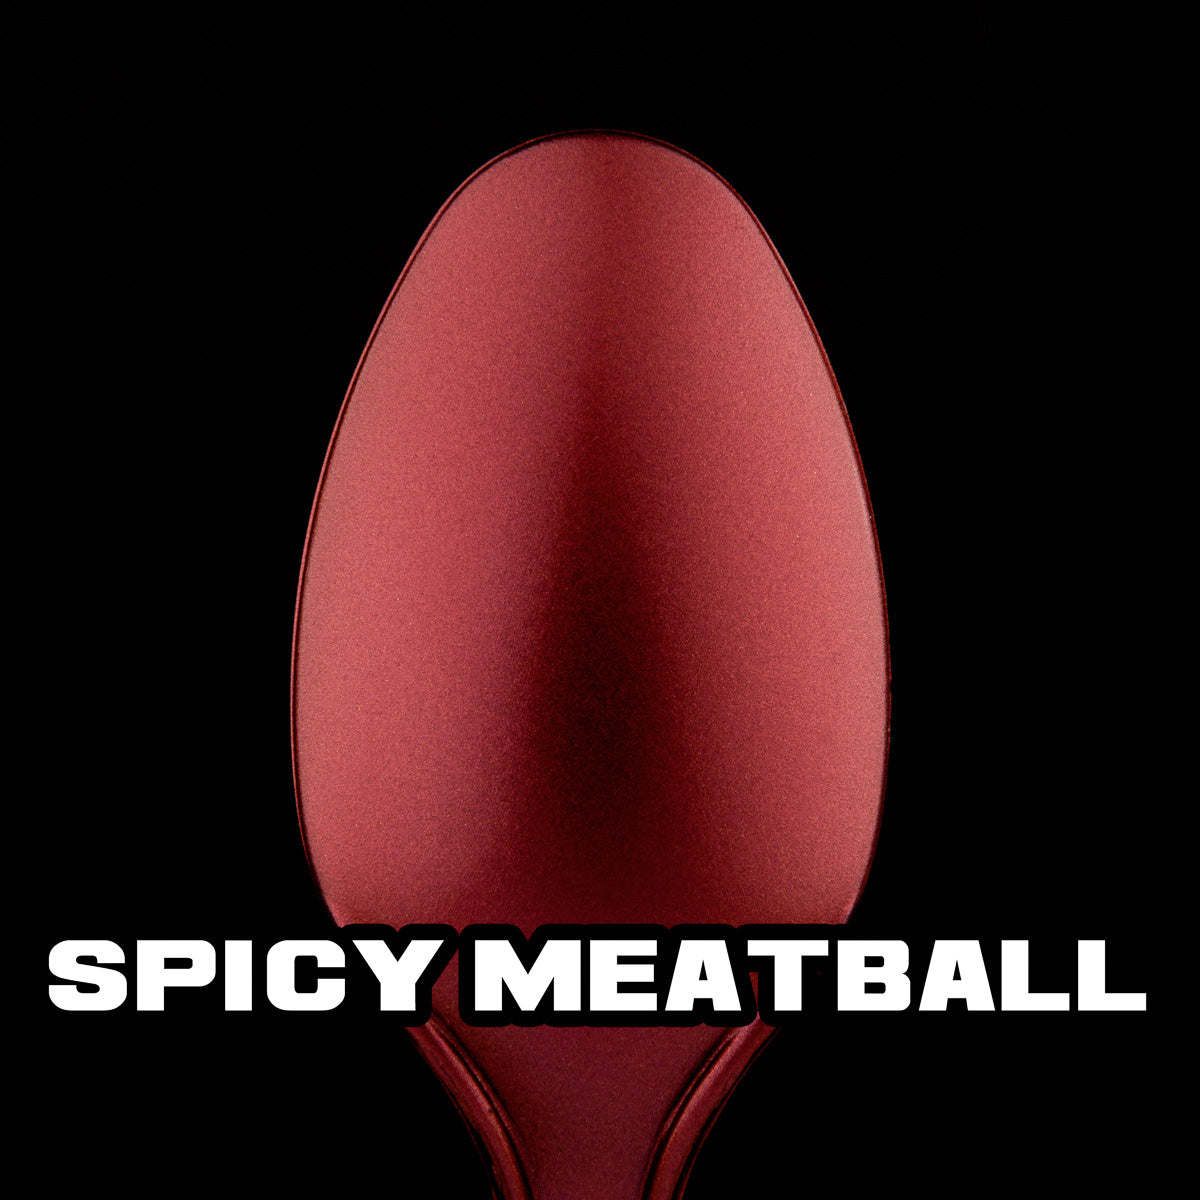 spoon with red metallic paint (Spicy Meatball)